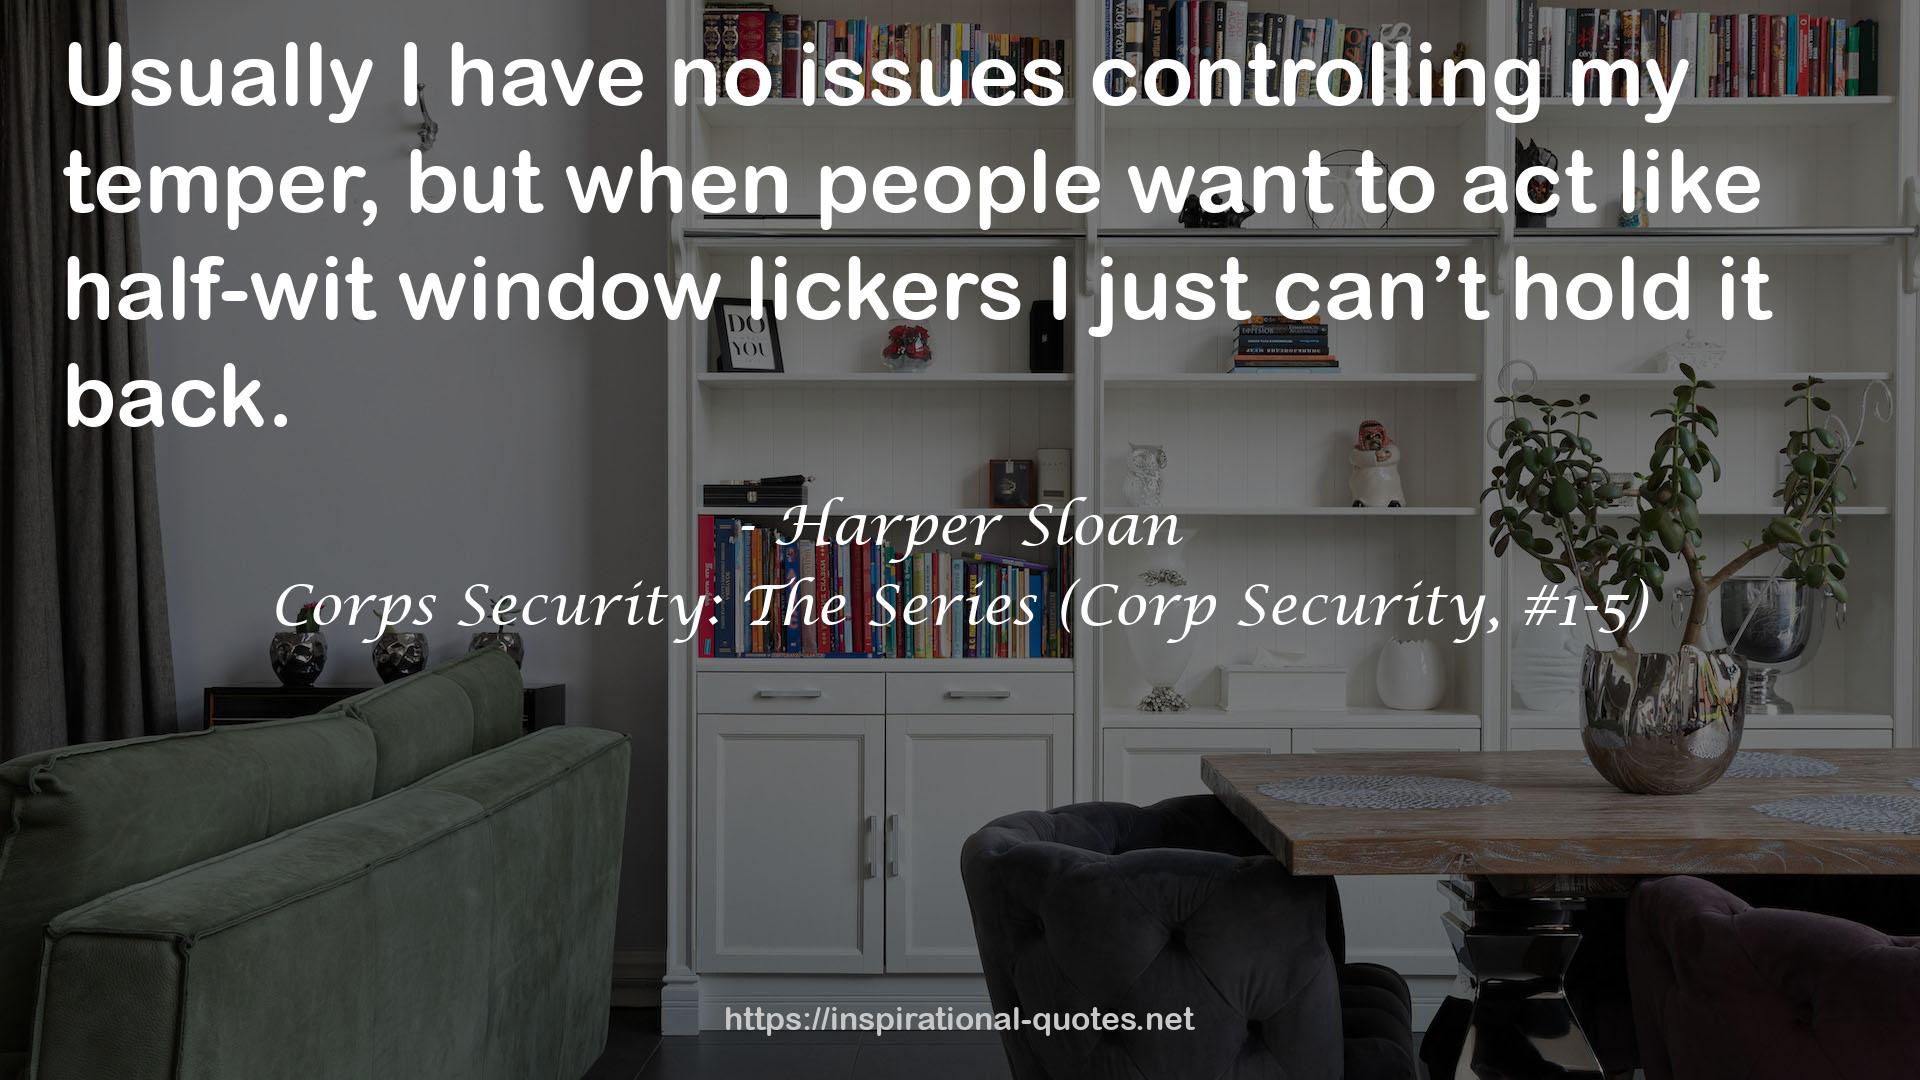 Corps Security: The Series (Corp Security, #1-5) QUOTES